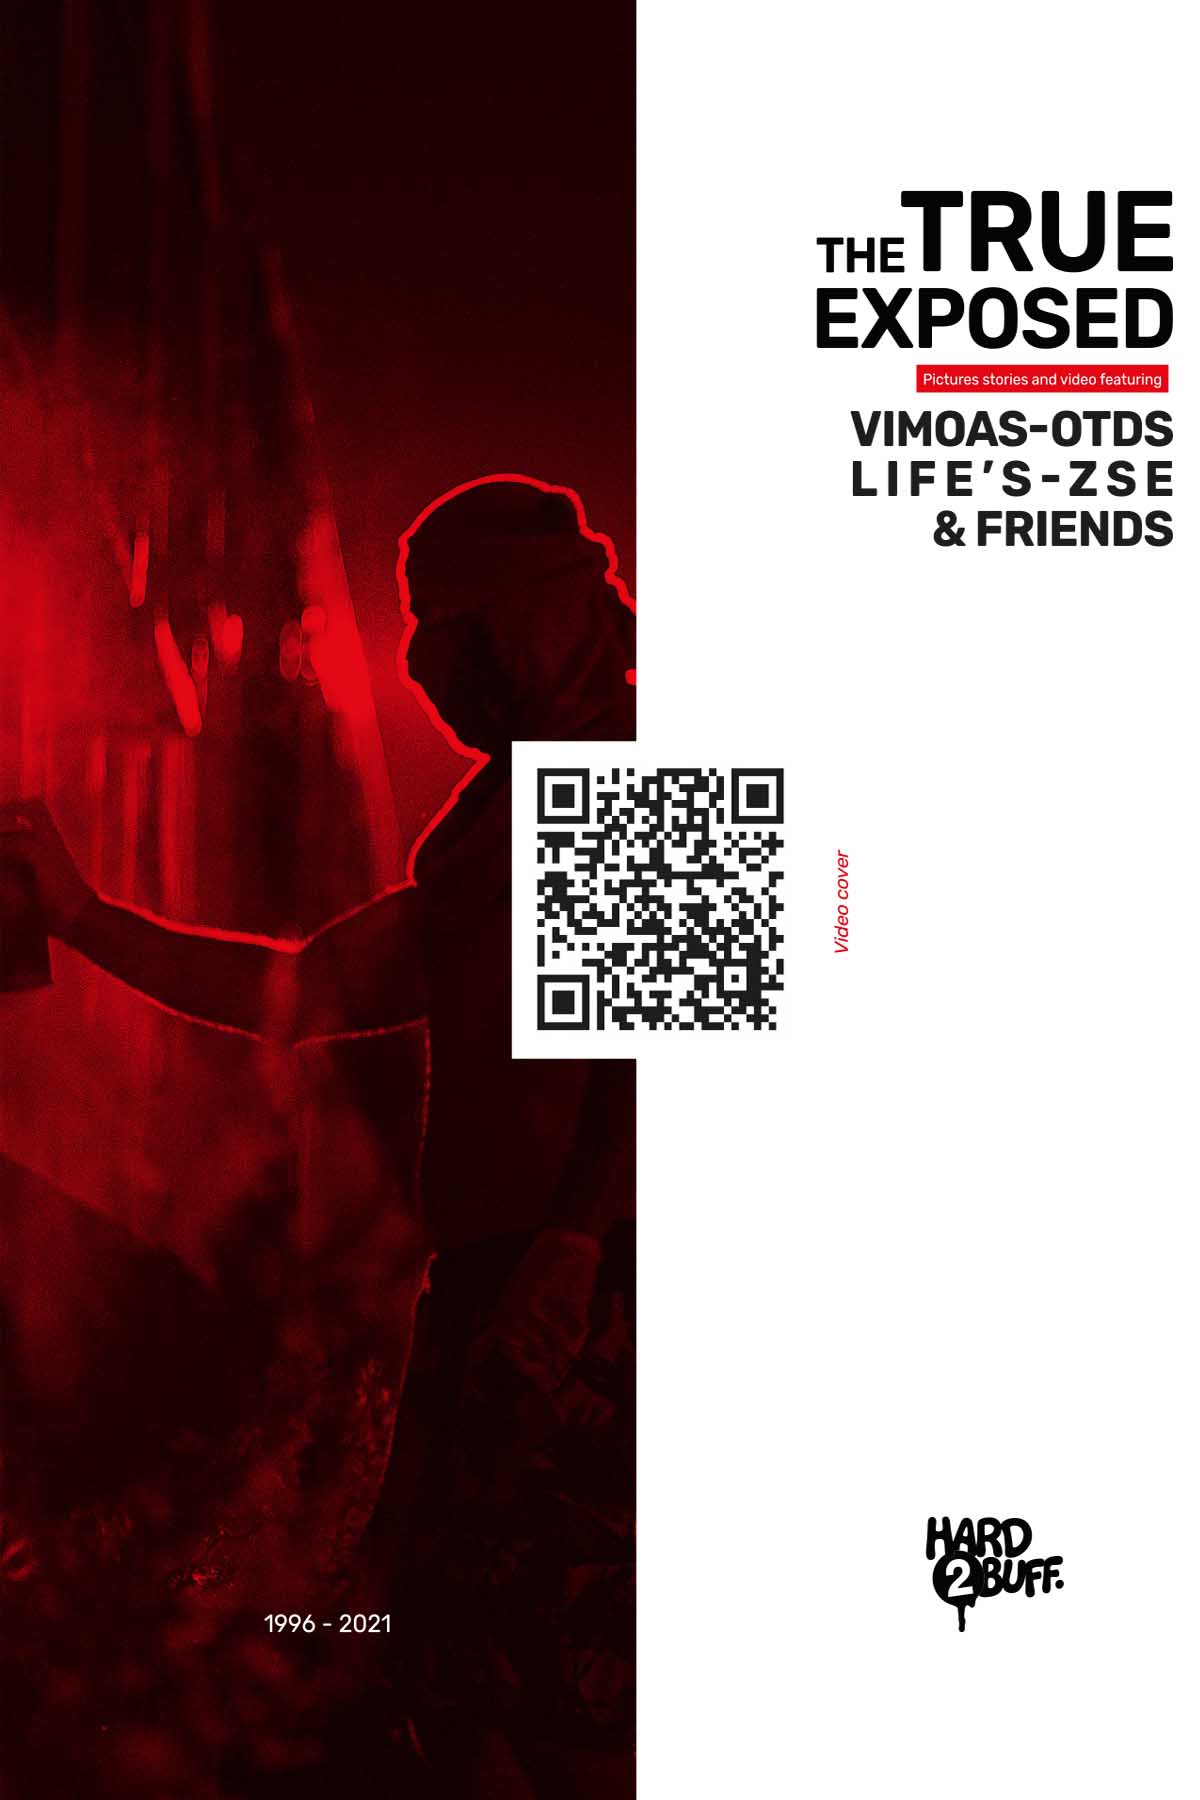 THE TRUE EXPOSED - The book